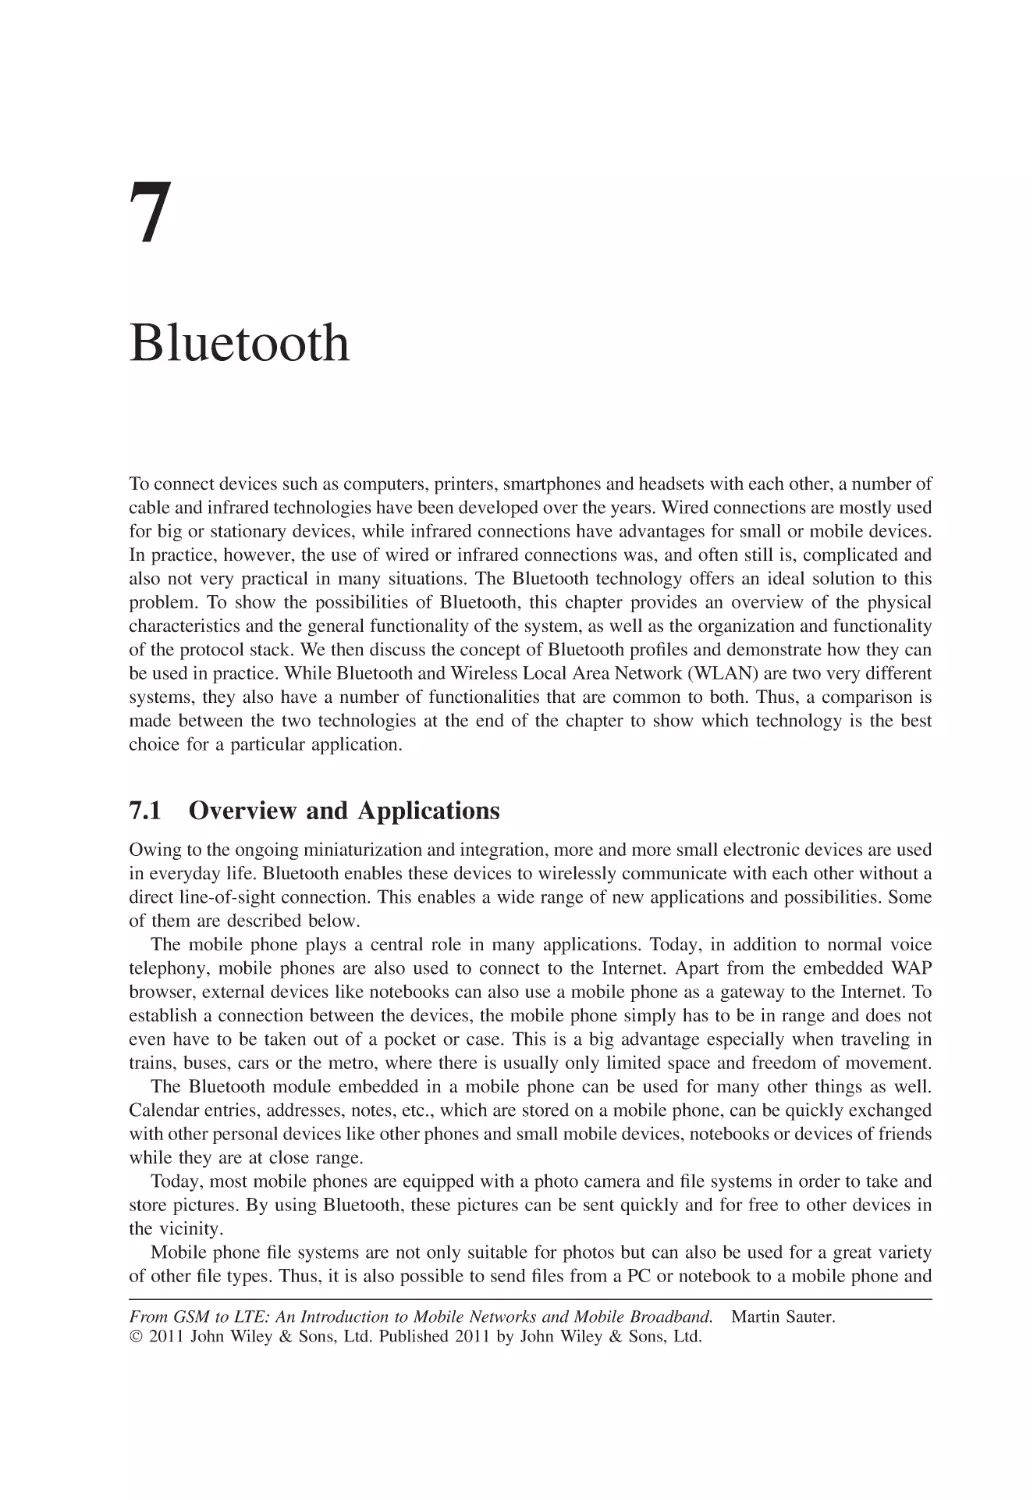 7 Bluetooth
7.1 Overview and Applications